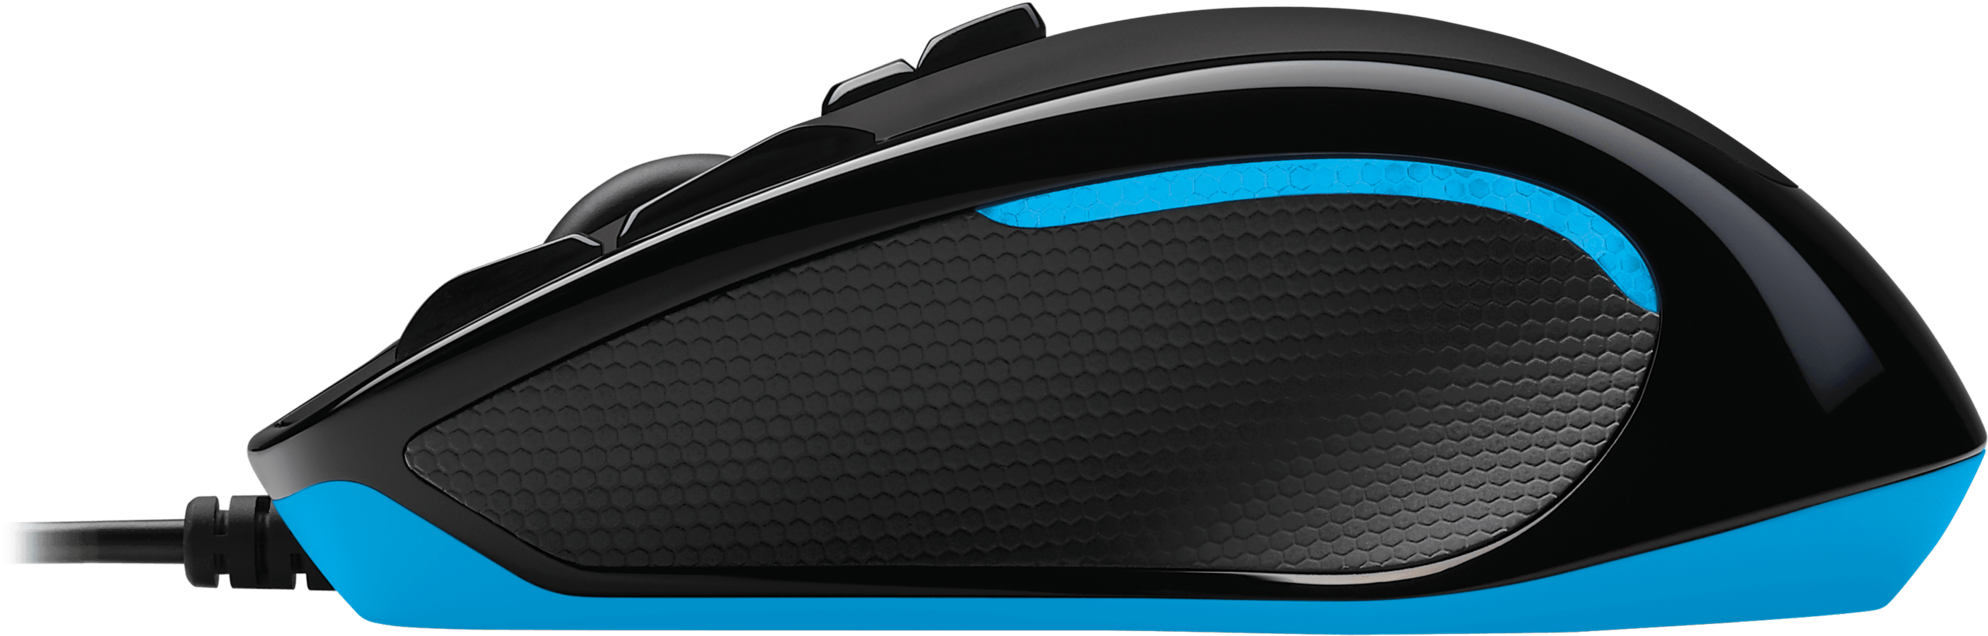 G302 Moba Gaming Mouse - Logitech G300s - Optical Mouse - Pc - Black (2000x653), Png Download